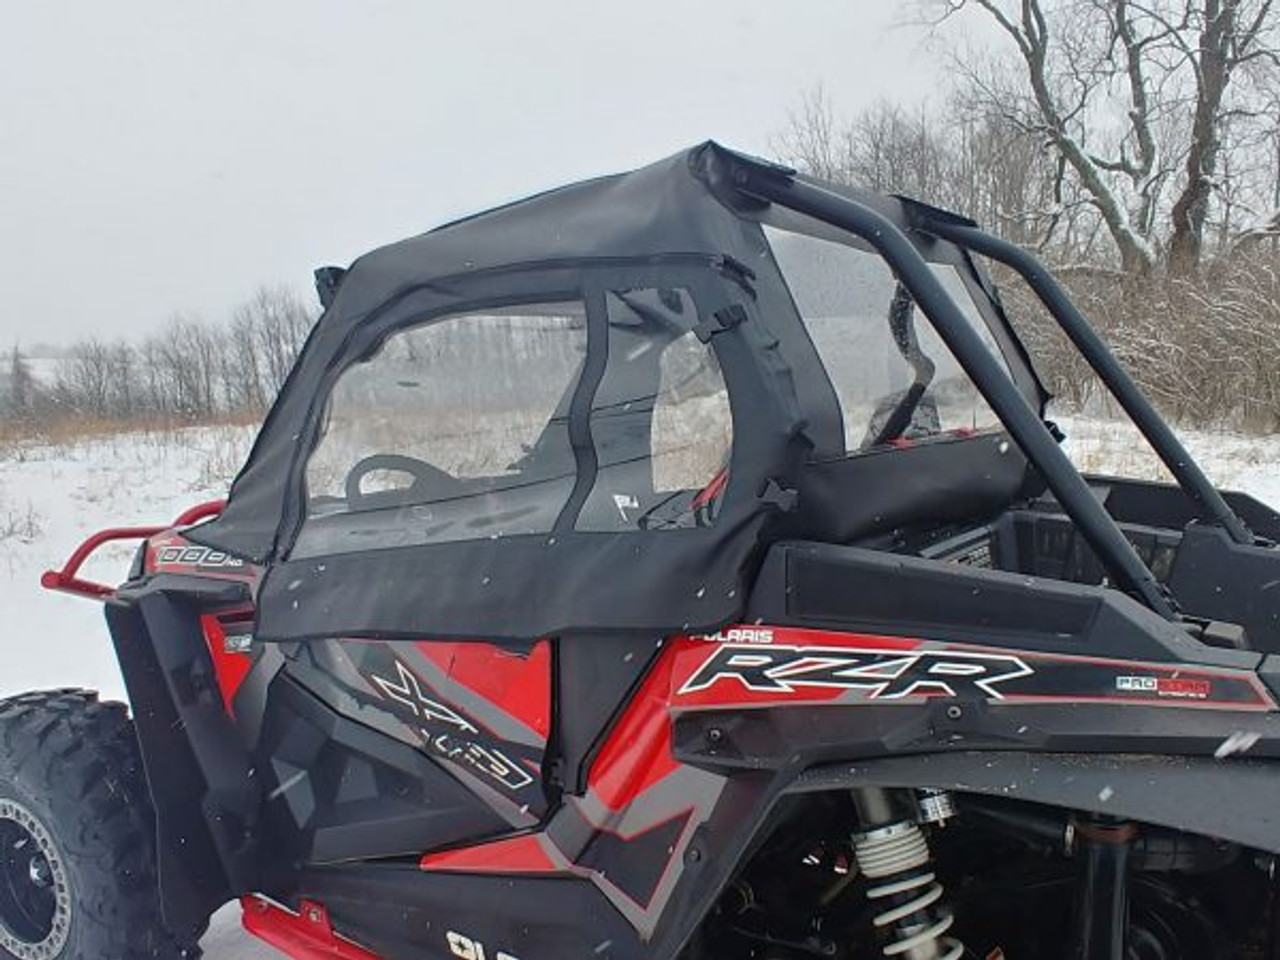 3 Star side x side accessories Polaris RZR XP1000/XP Turbo/S1000 upper doors and rear window side and rear view